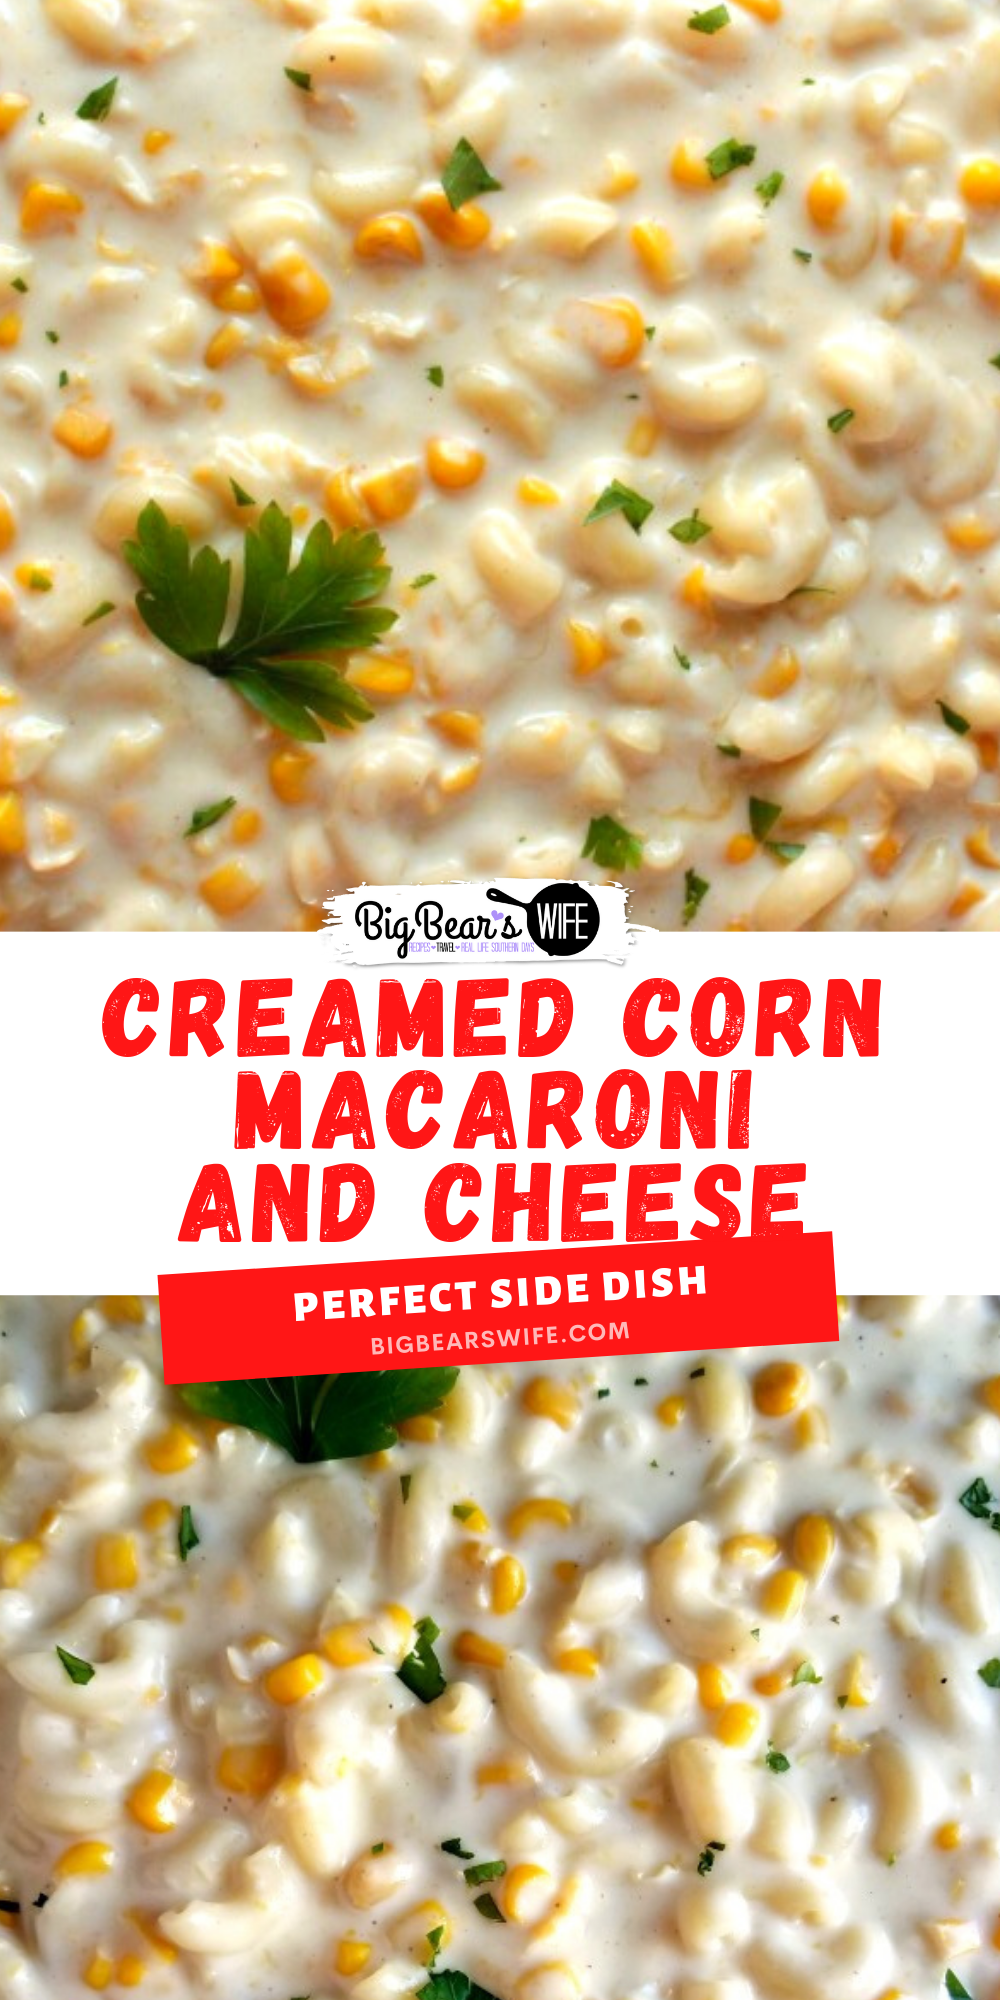 Heavenly white cheddar mac and cheese and tasty creamed corn come together perfectly in this easy to whip up Creamed Corn Macaroni and Cheese! via @bigbearswife